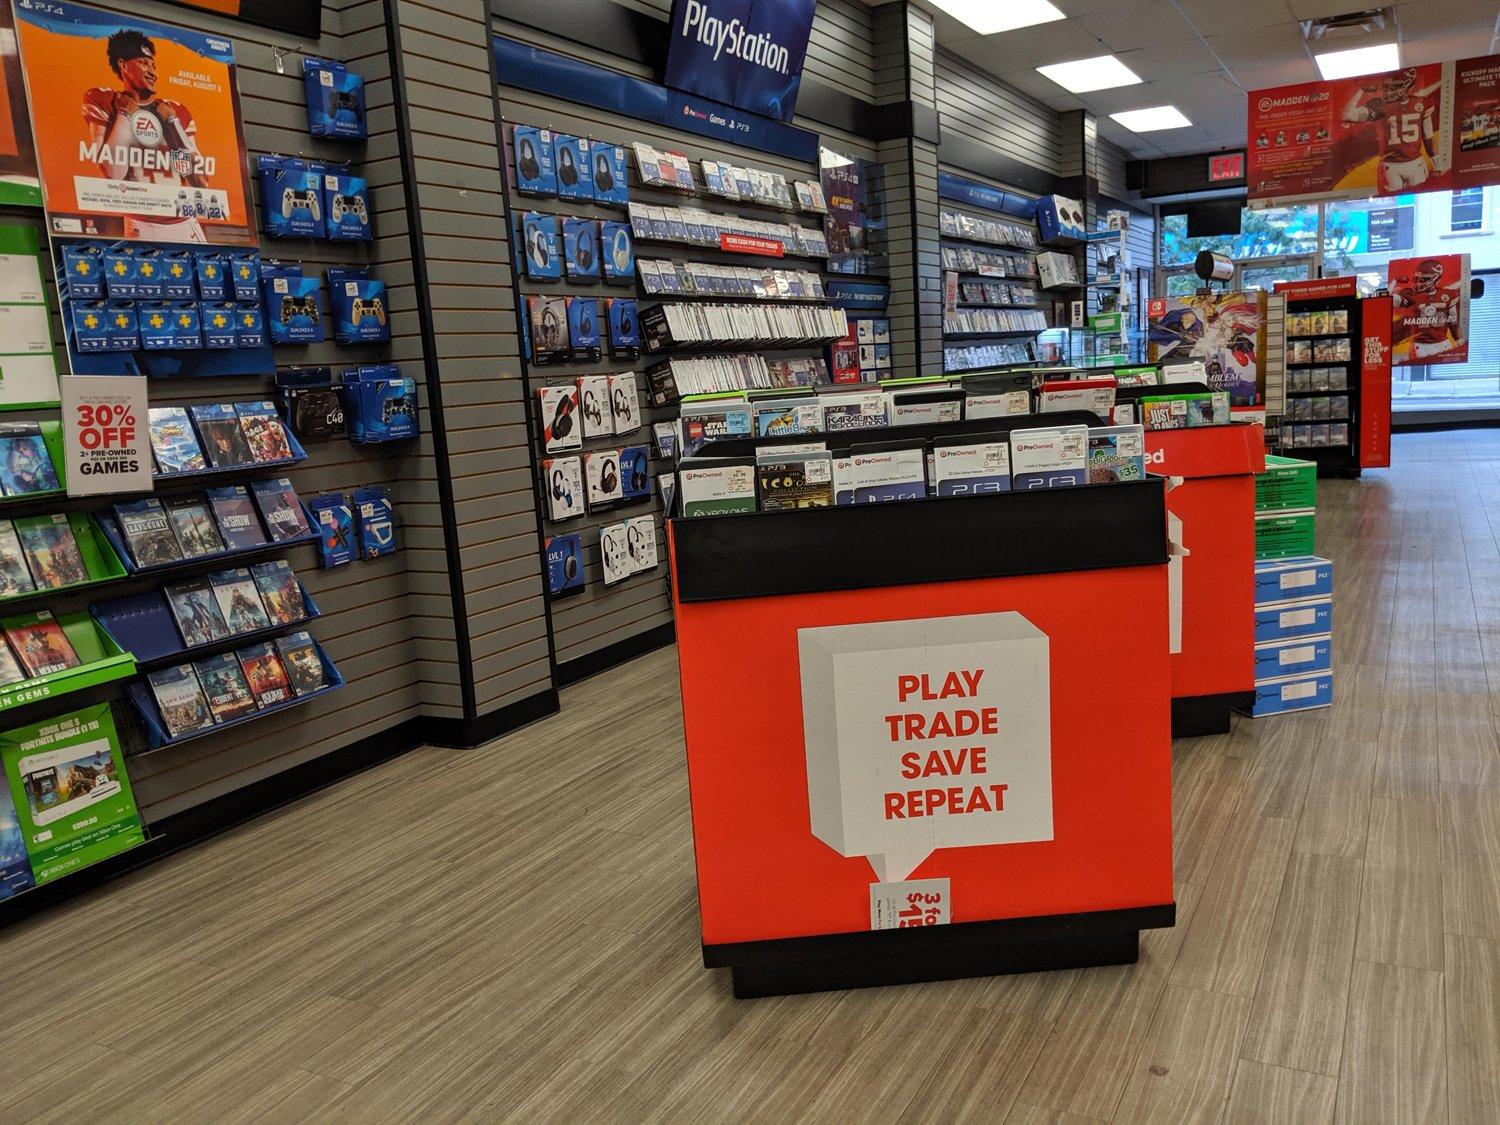 The world's biggest video game retailer, GameStop, is closing hundreds